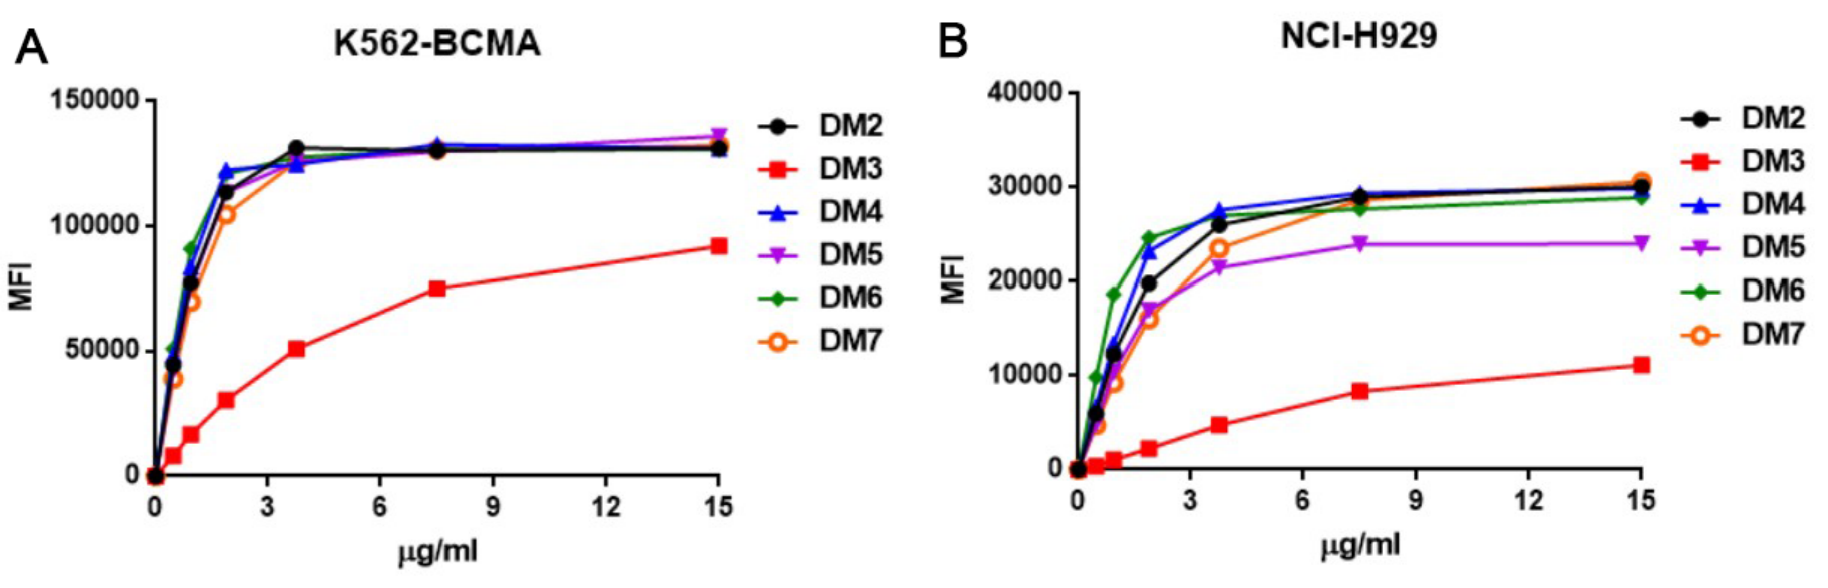 DME100004-BCMA-Fig4.png